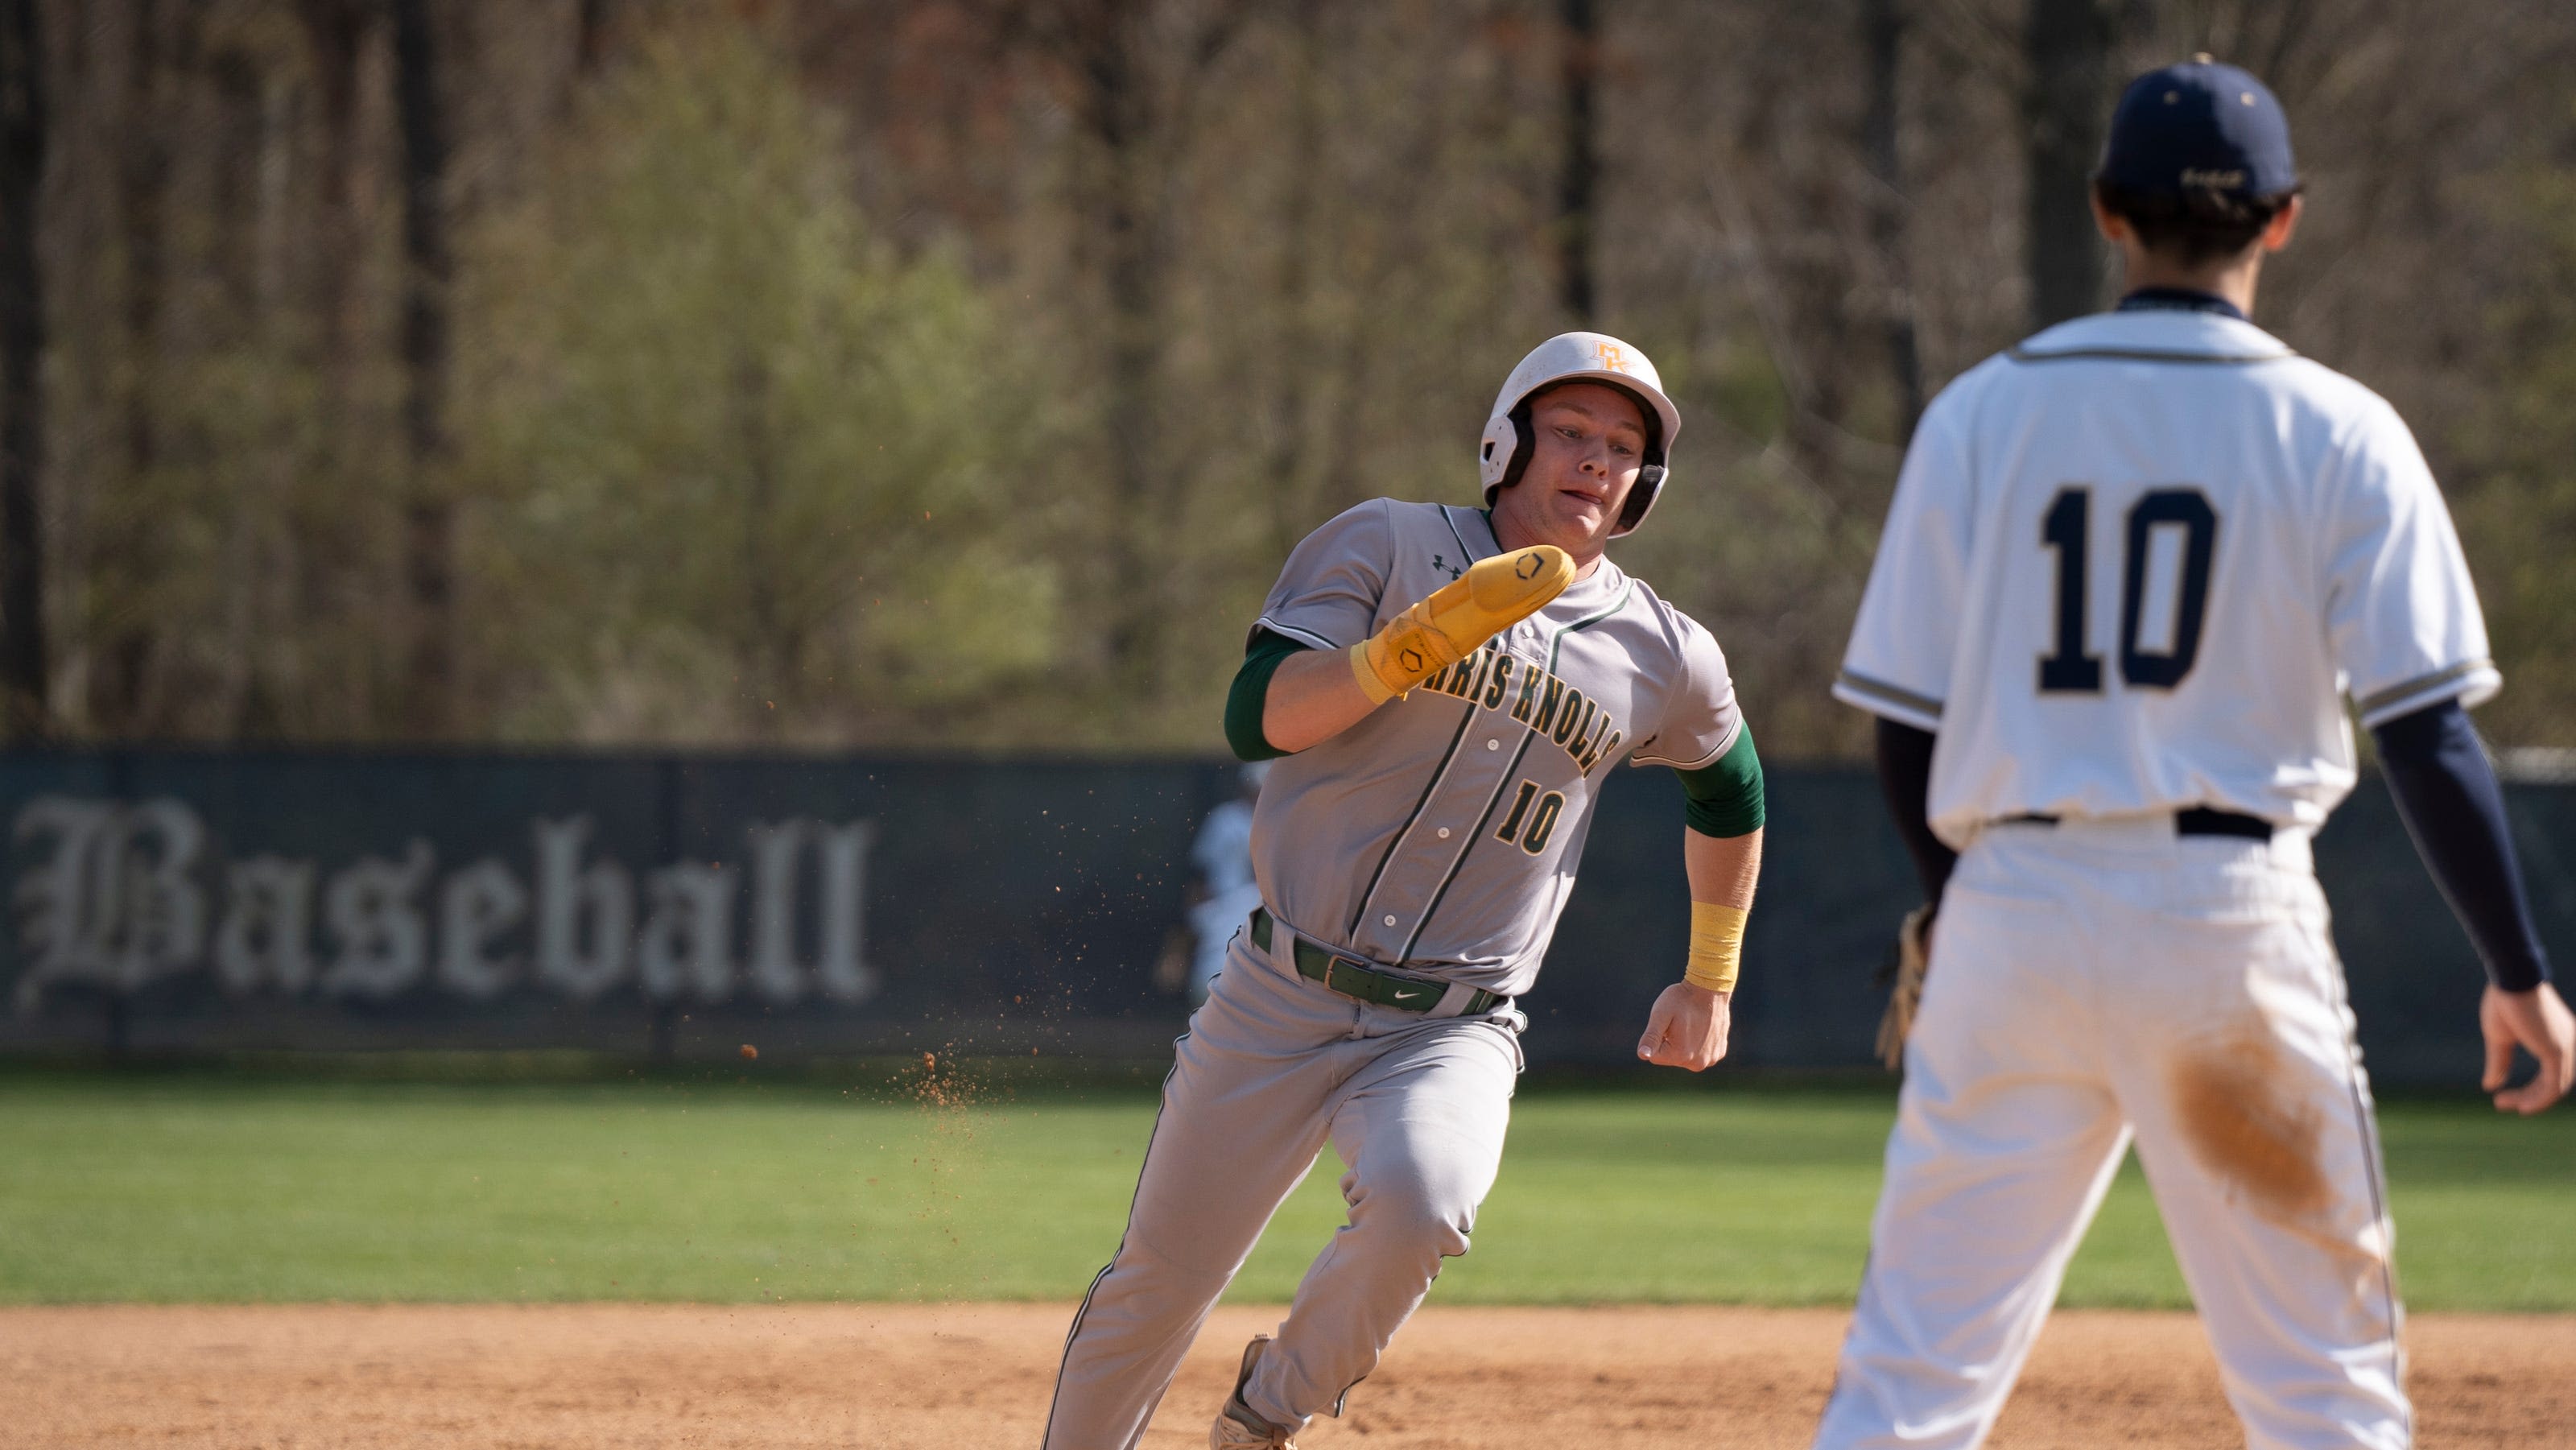 Baseball: Morris Knolls repeats as sectional champion with 10-run win over West Essex